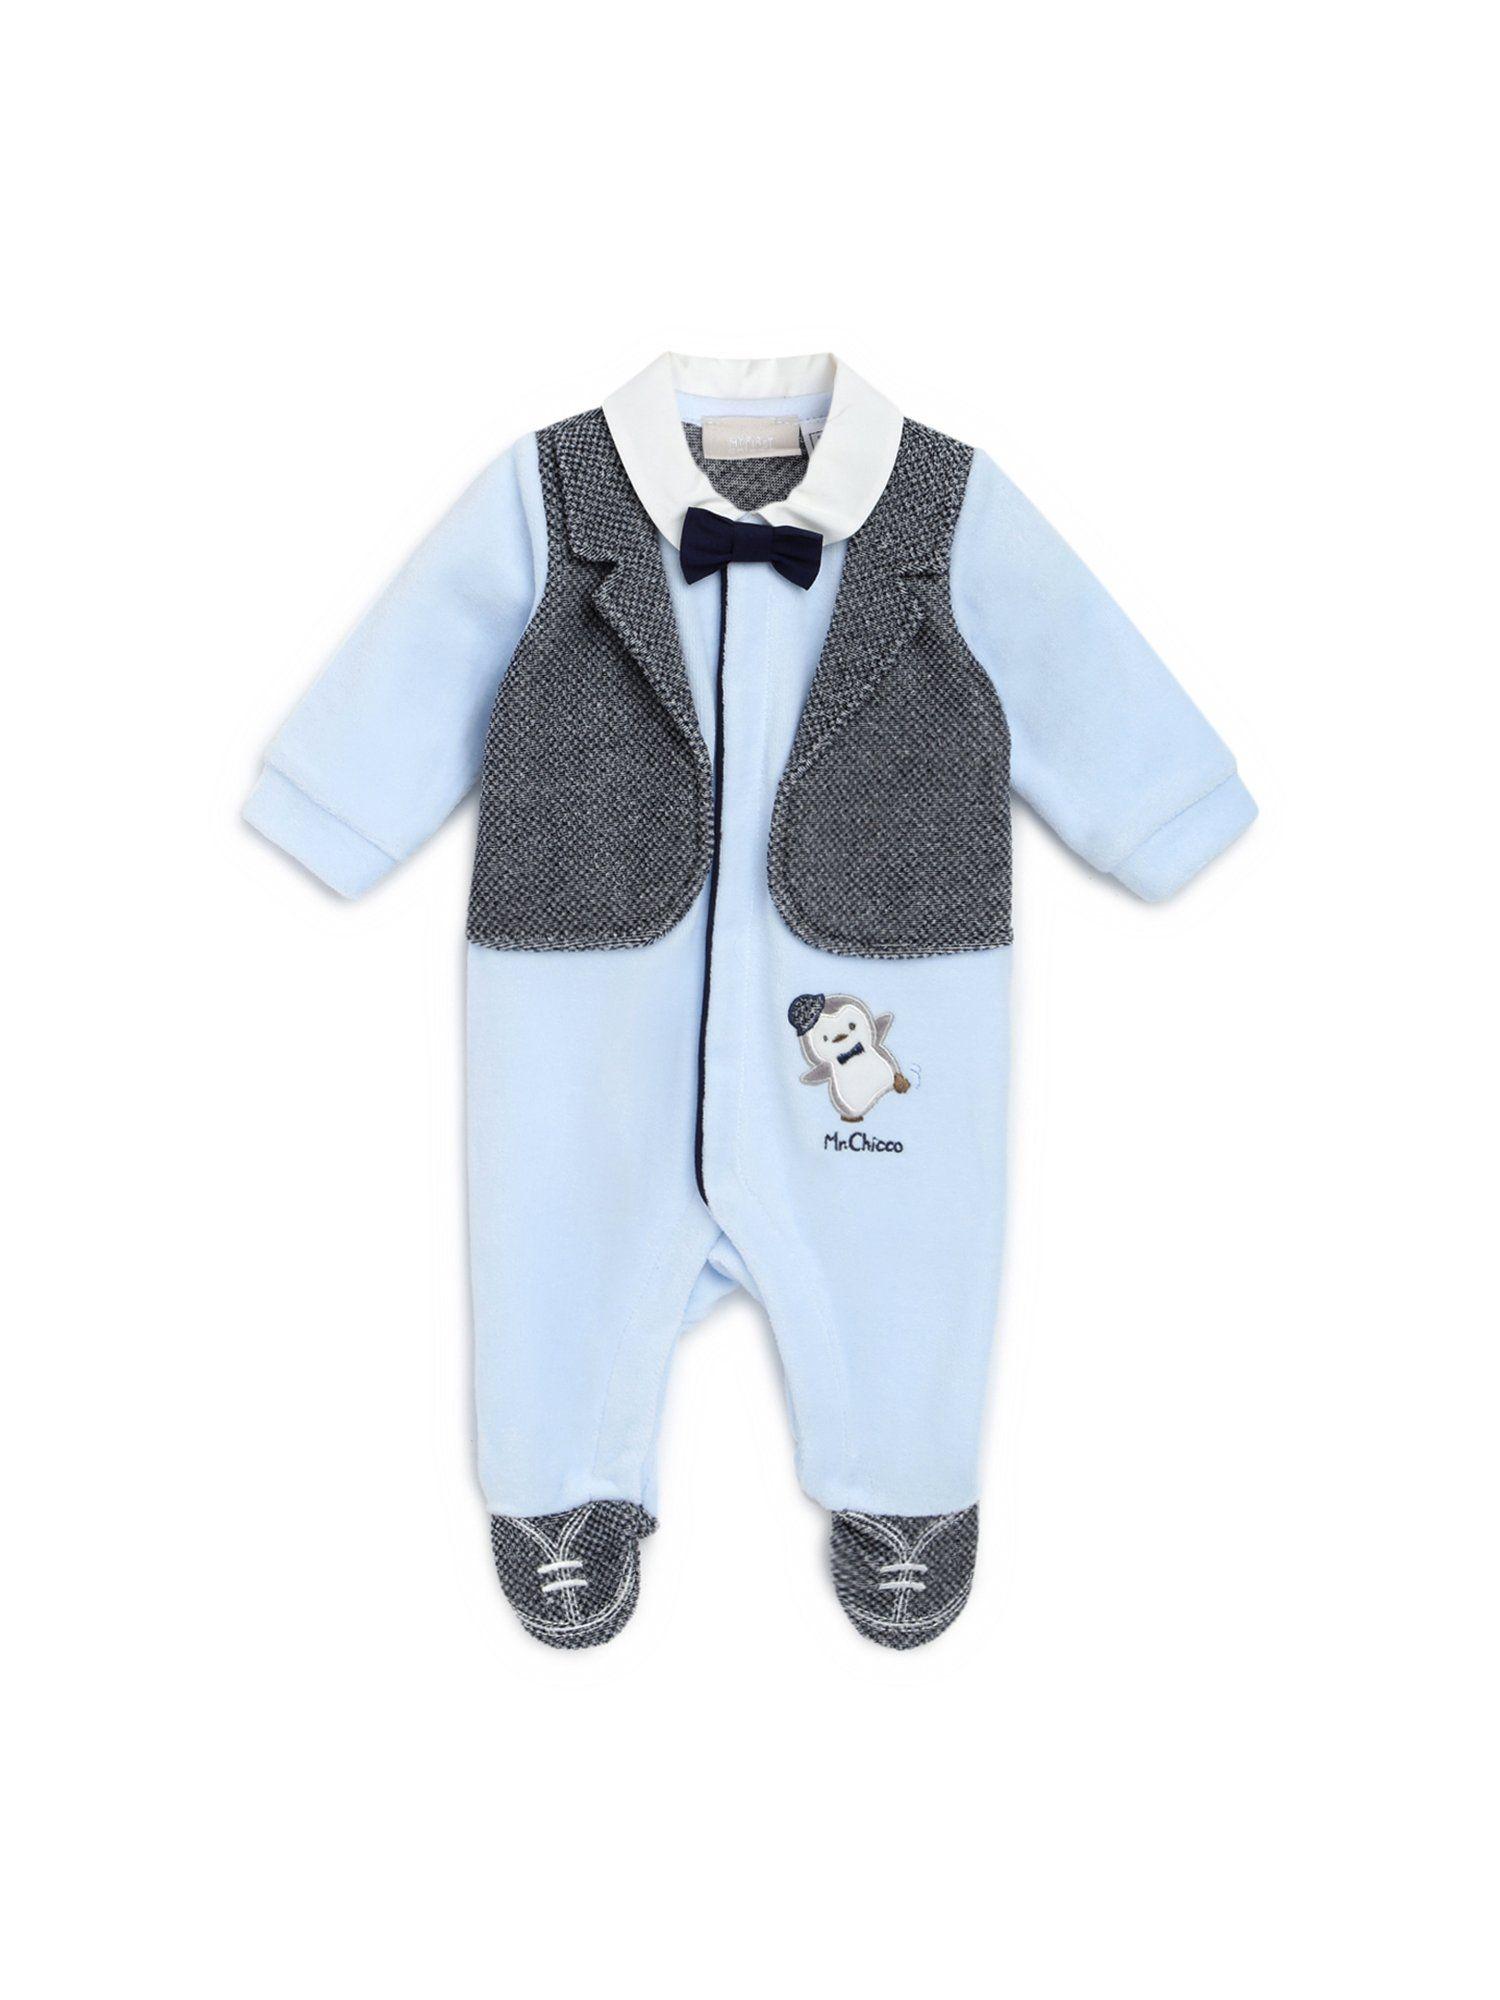 boys light blue front opening rompers with bow tie (set of 2)